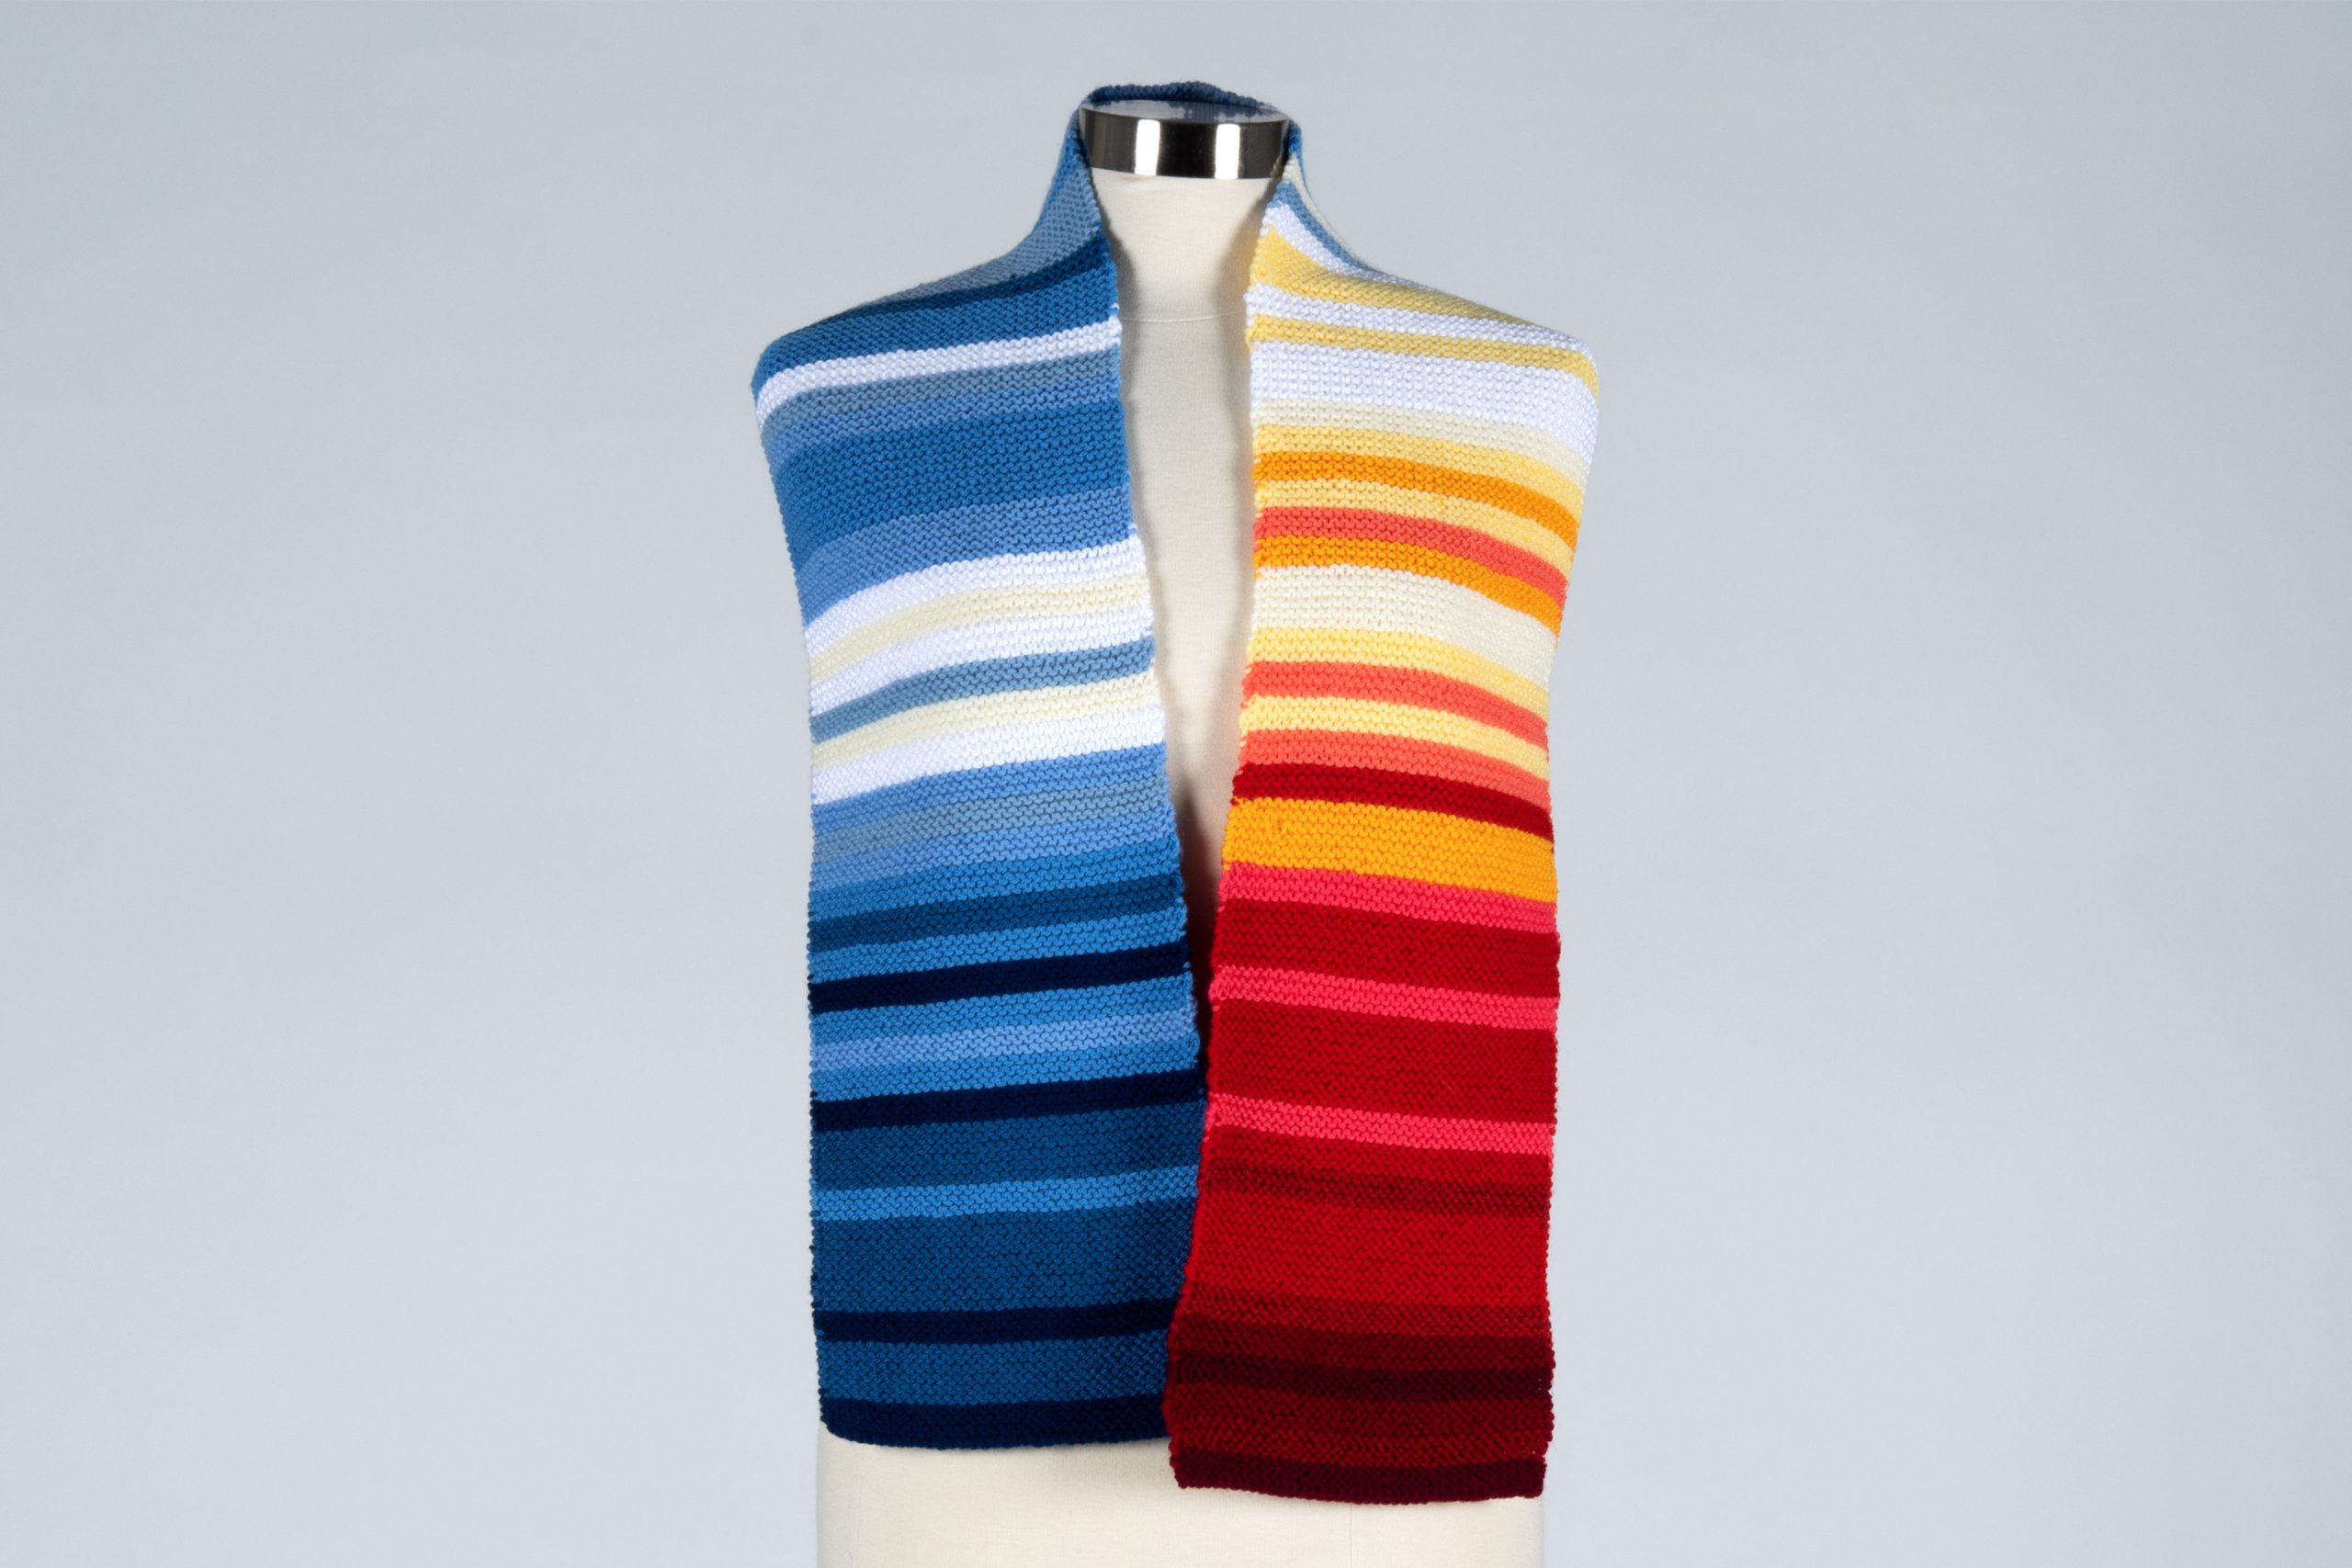 Mannequin wears a striped scarf around the shoulders. One side has various shades of blue and white while the other has various shades of red and white.